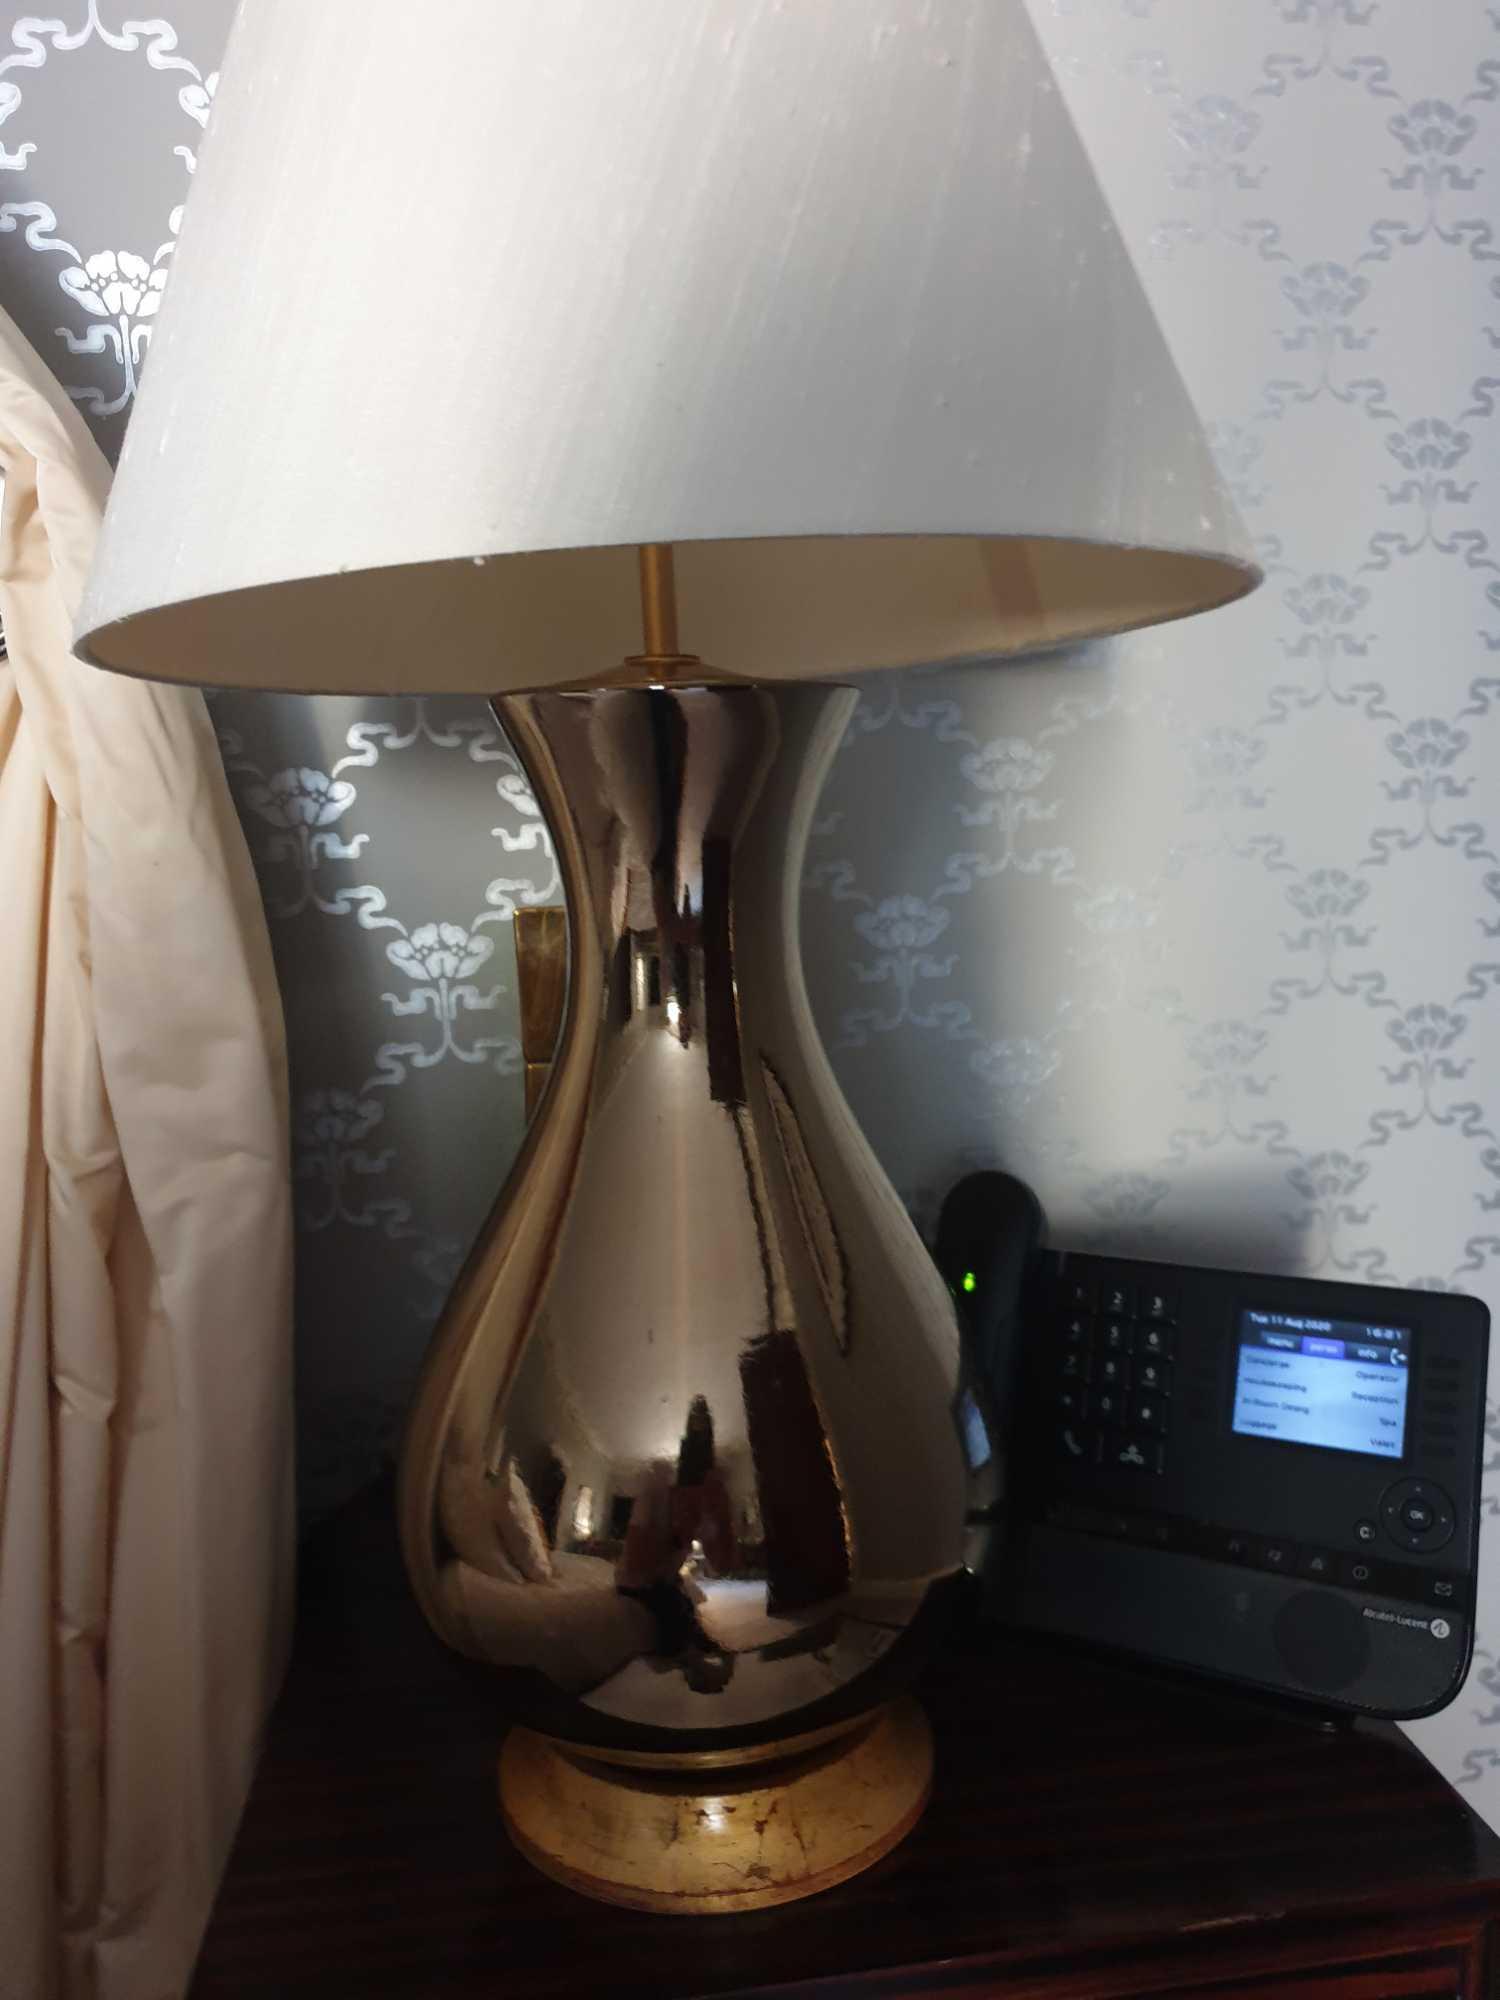 A Pair Of Heathfield And Co Louisa Glazed Ceramic Table Lamp With Textured Shade 77cm (Room 321) - Image 2 of 3